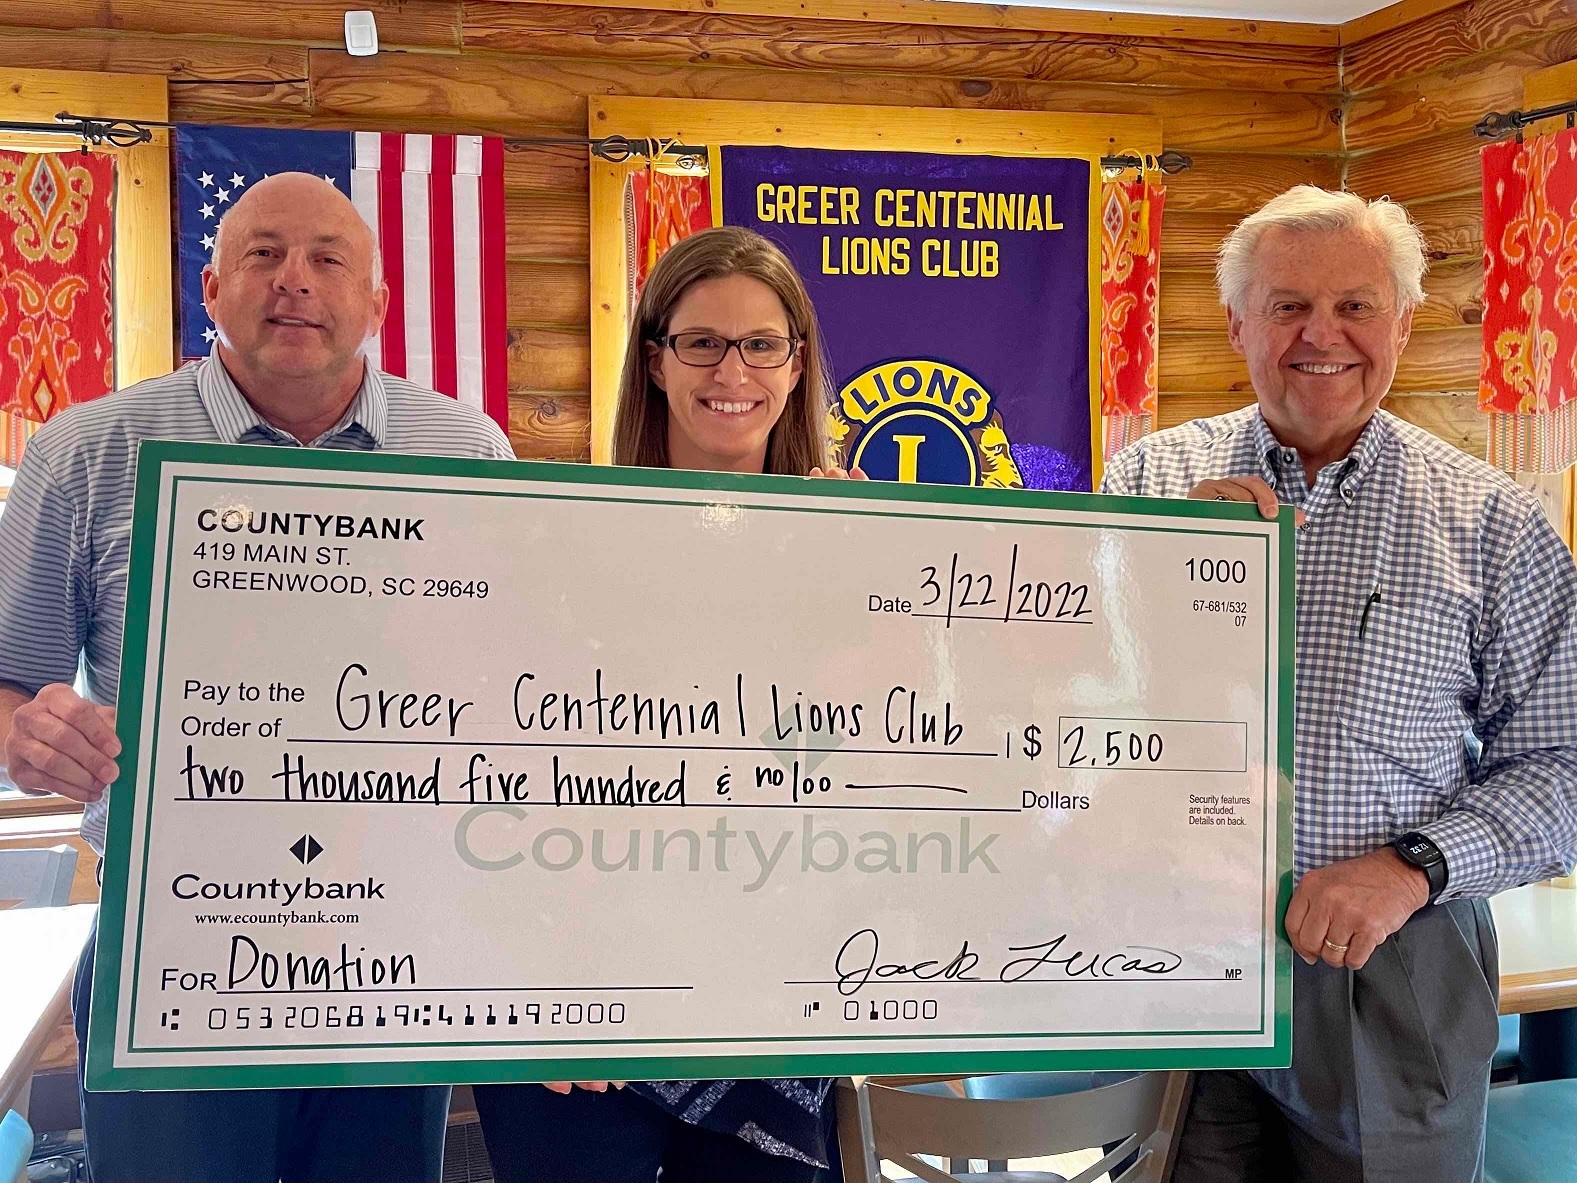 Pictured (left to right) are Jack Lucas, senior commercial banker for Countybank; Alison Rauch, president of the Greer Centennial Lions Club; and Rudy Painter, division executive for Countybank Insurance pose with the donation. (Photo/Provided)  